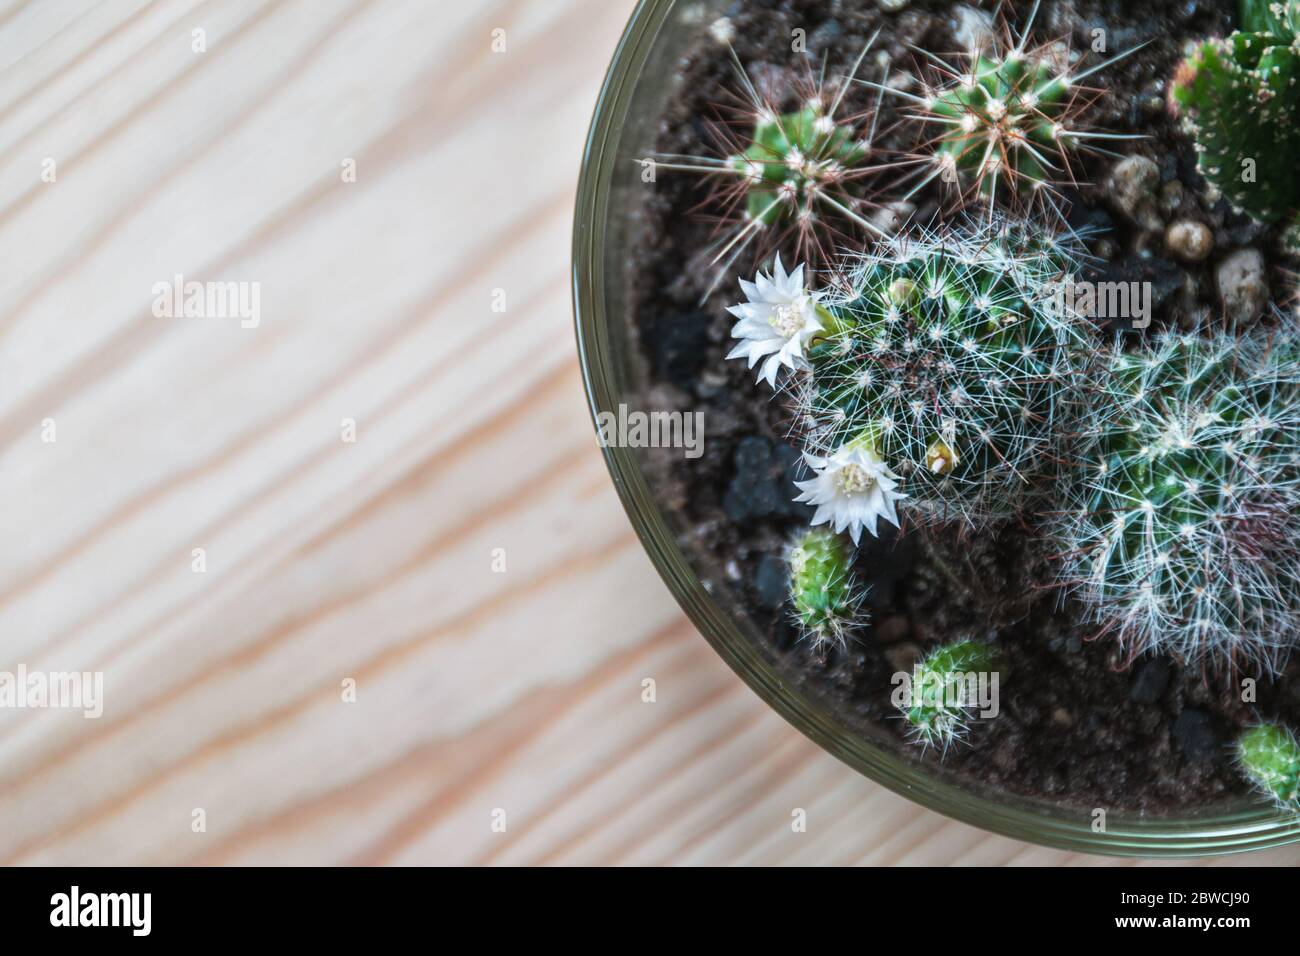 Top-down view of a flowering cactus in a glass terrarium with other young cacti on a light wooden table. Tropical houseplant flower detail. Stock Photo